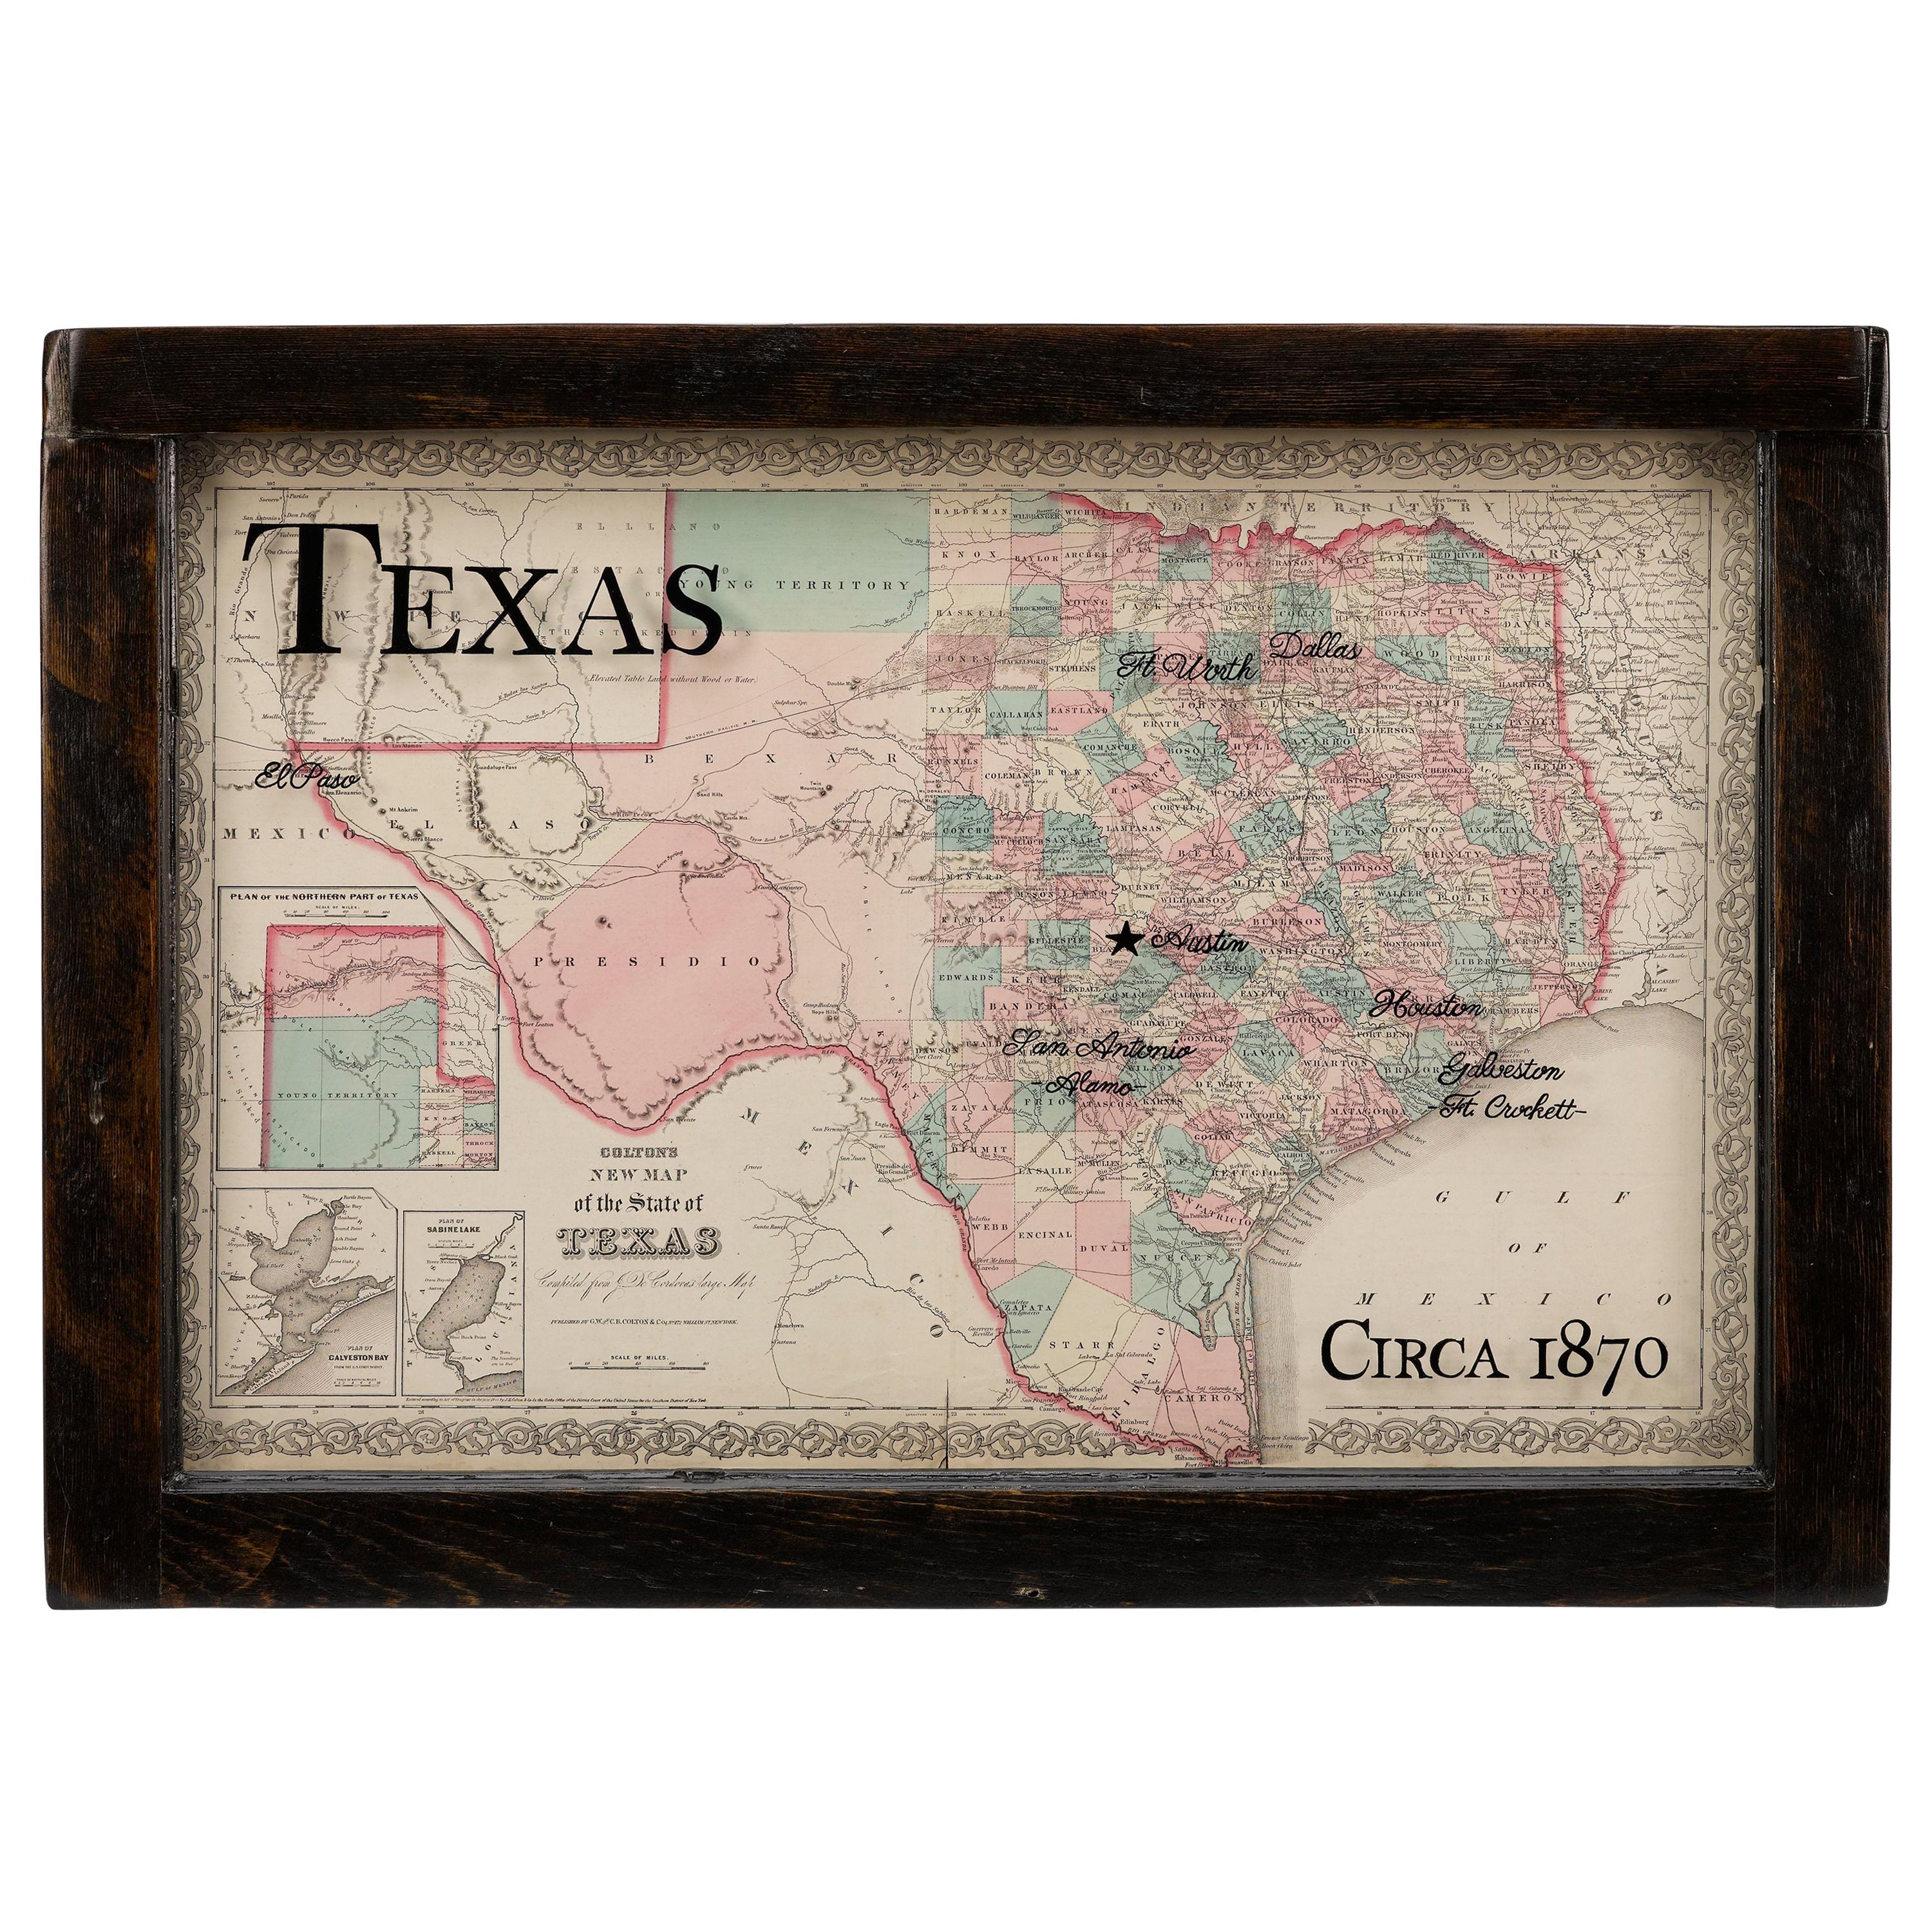 1870 Texas Map by Colton